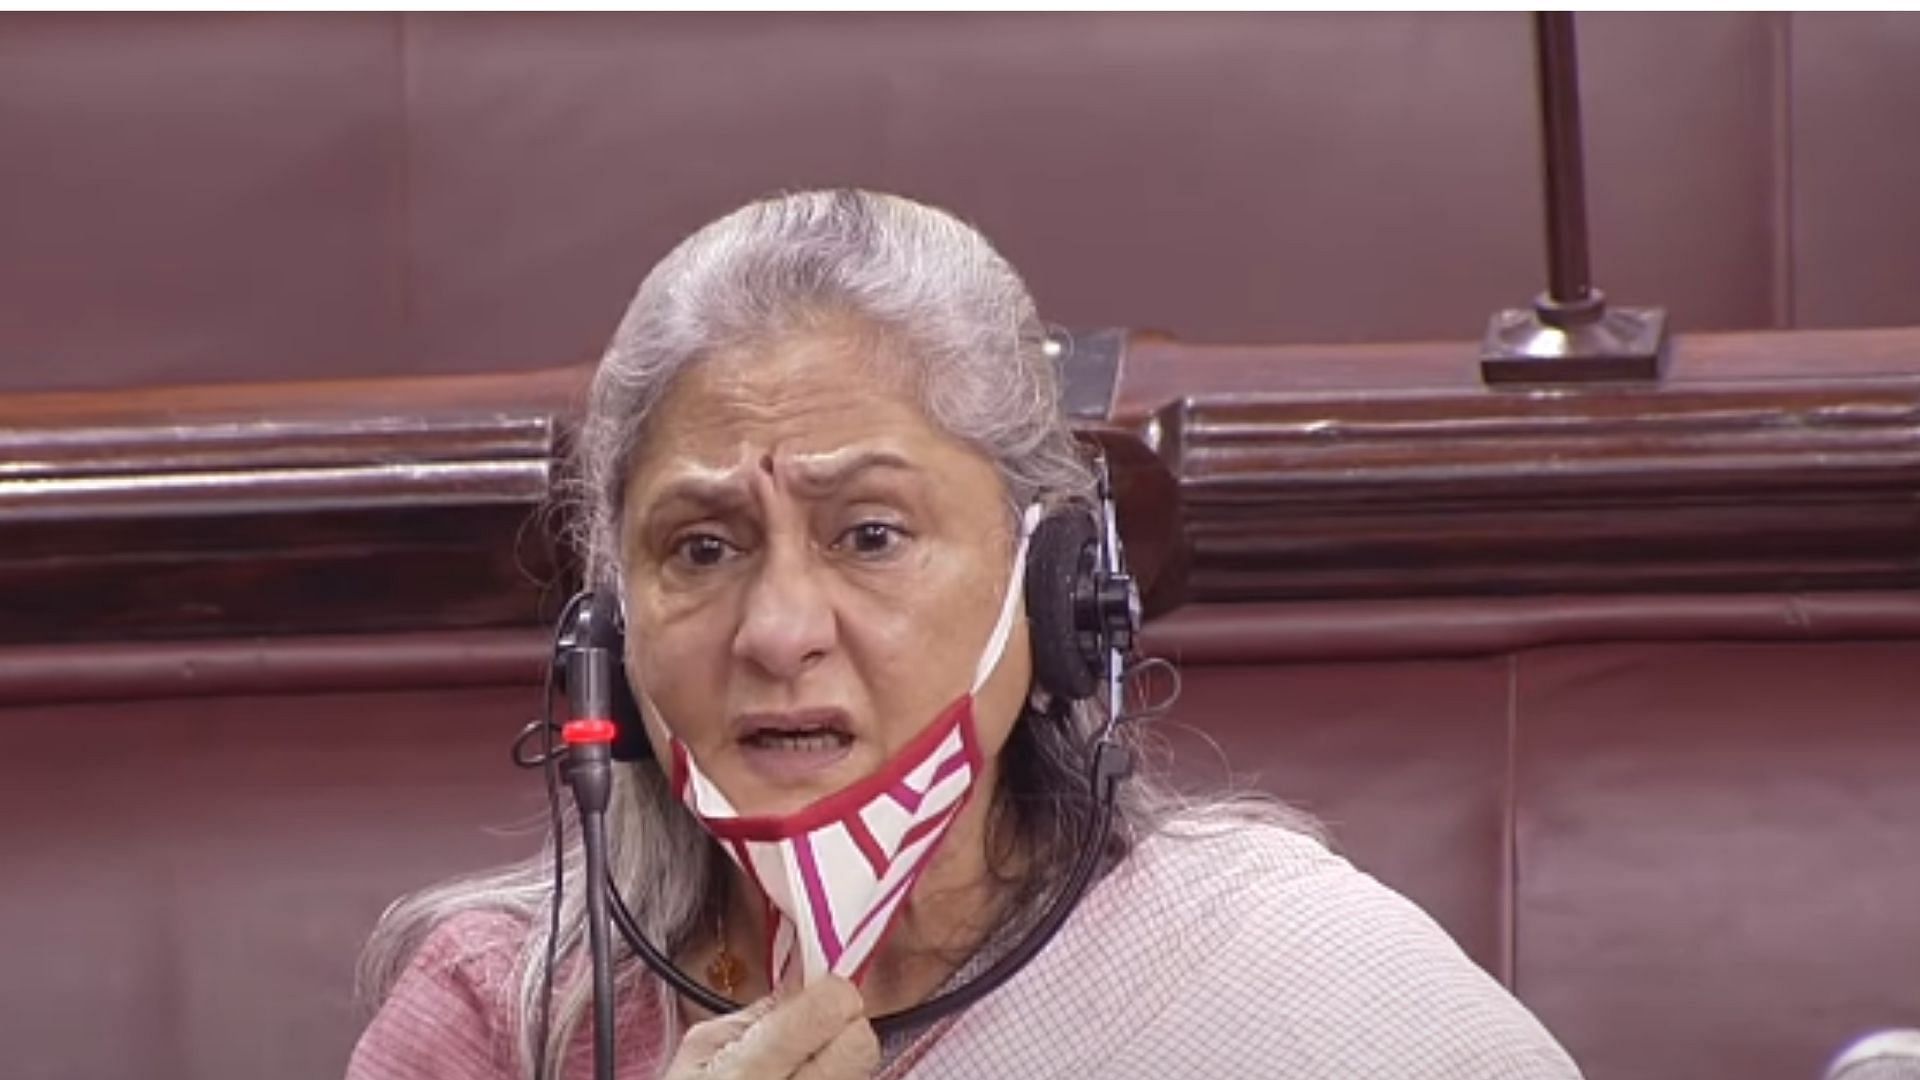 Jaya Bachchan speaking in front of the parliament.